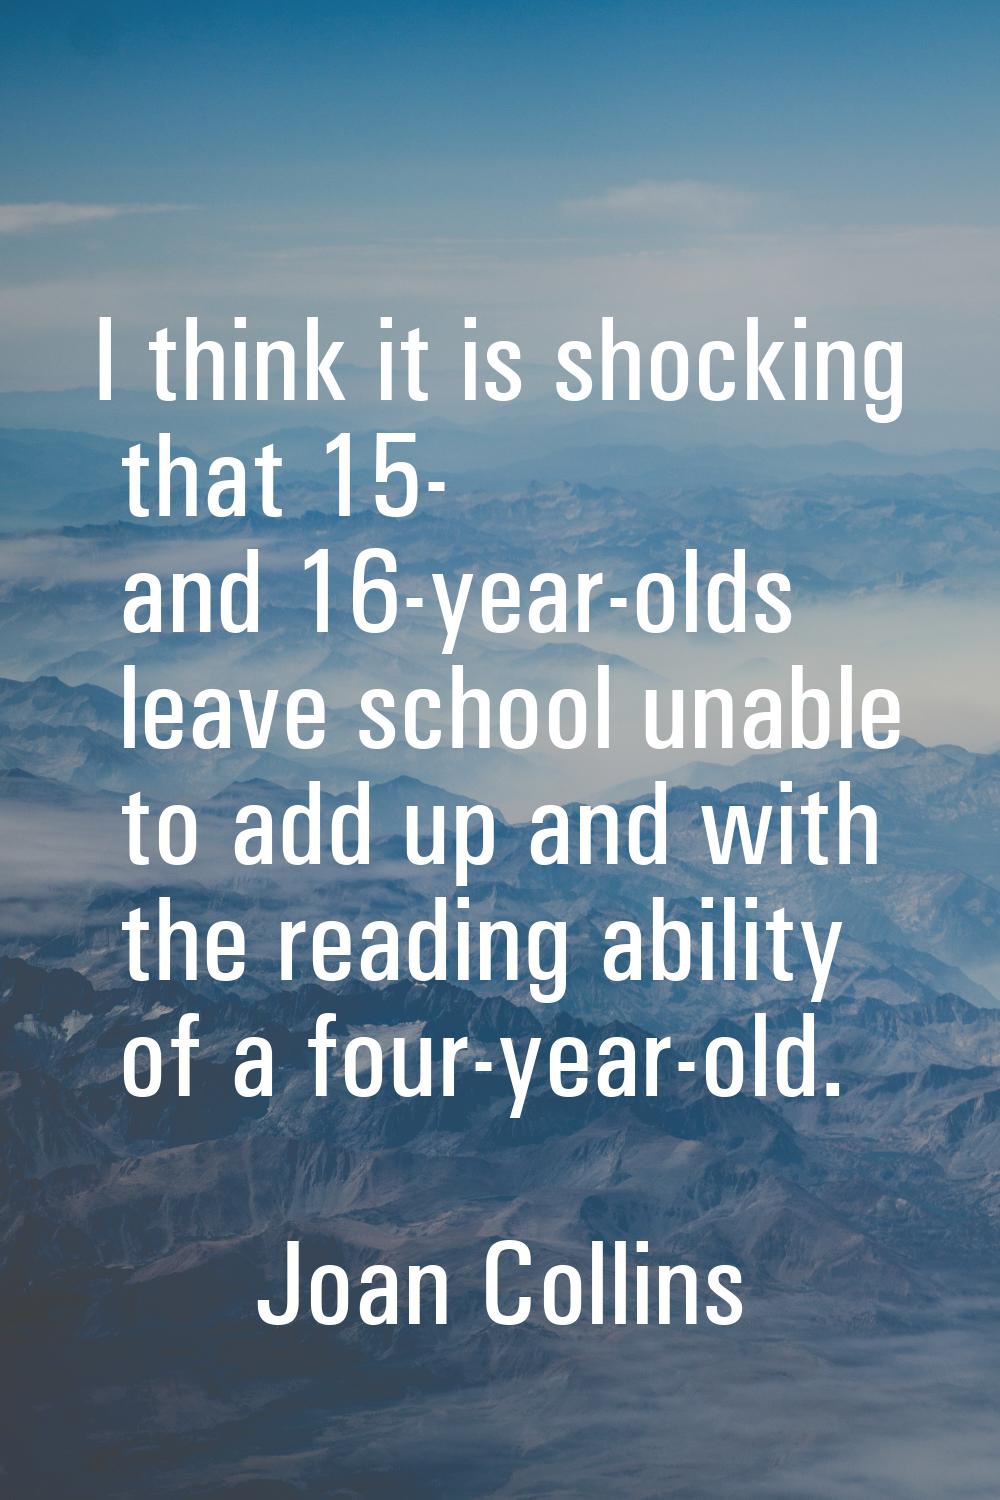 I think it is shocking that 15- and 16-year-olds leave school unable to add up and with the reading